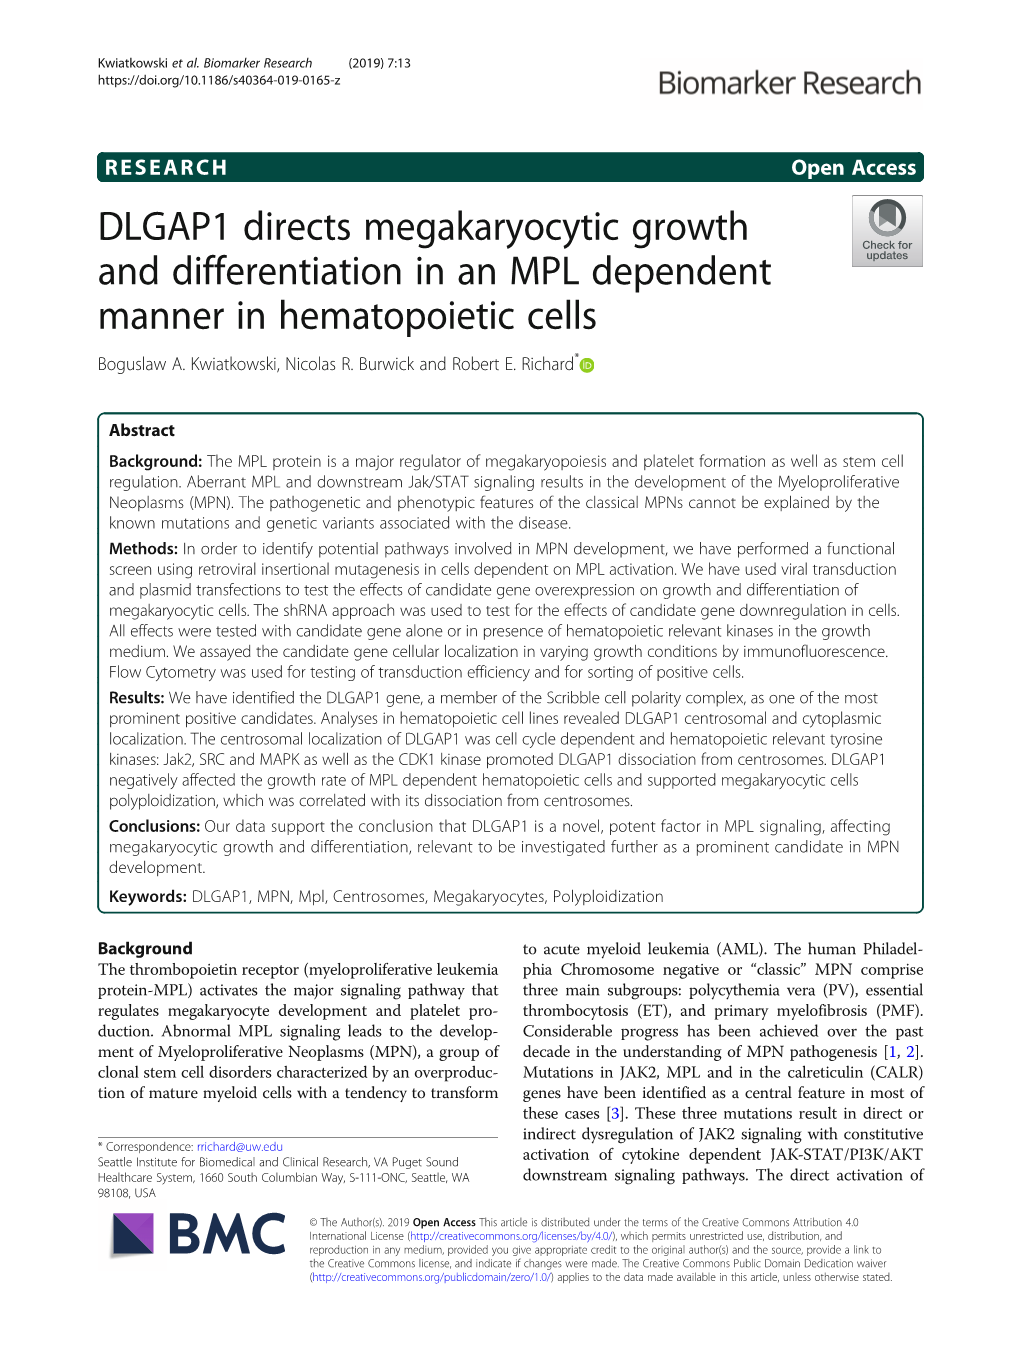 DLGAP1 Directs Megakaryocytic Growth and Differentiation in an MPL Dependent Manner in Hematopoietic Cells Boguslaw A